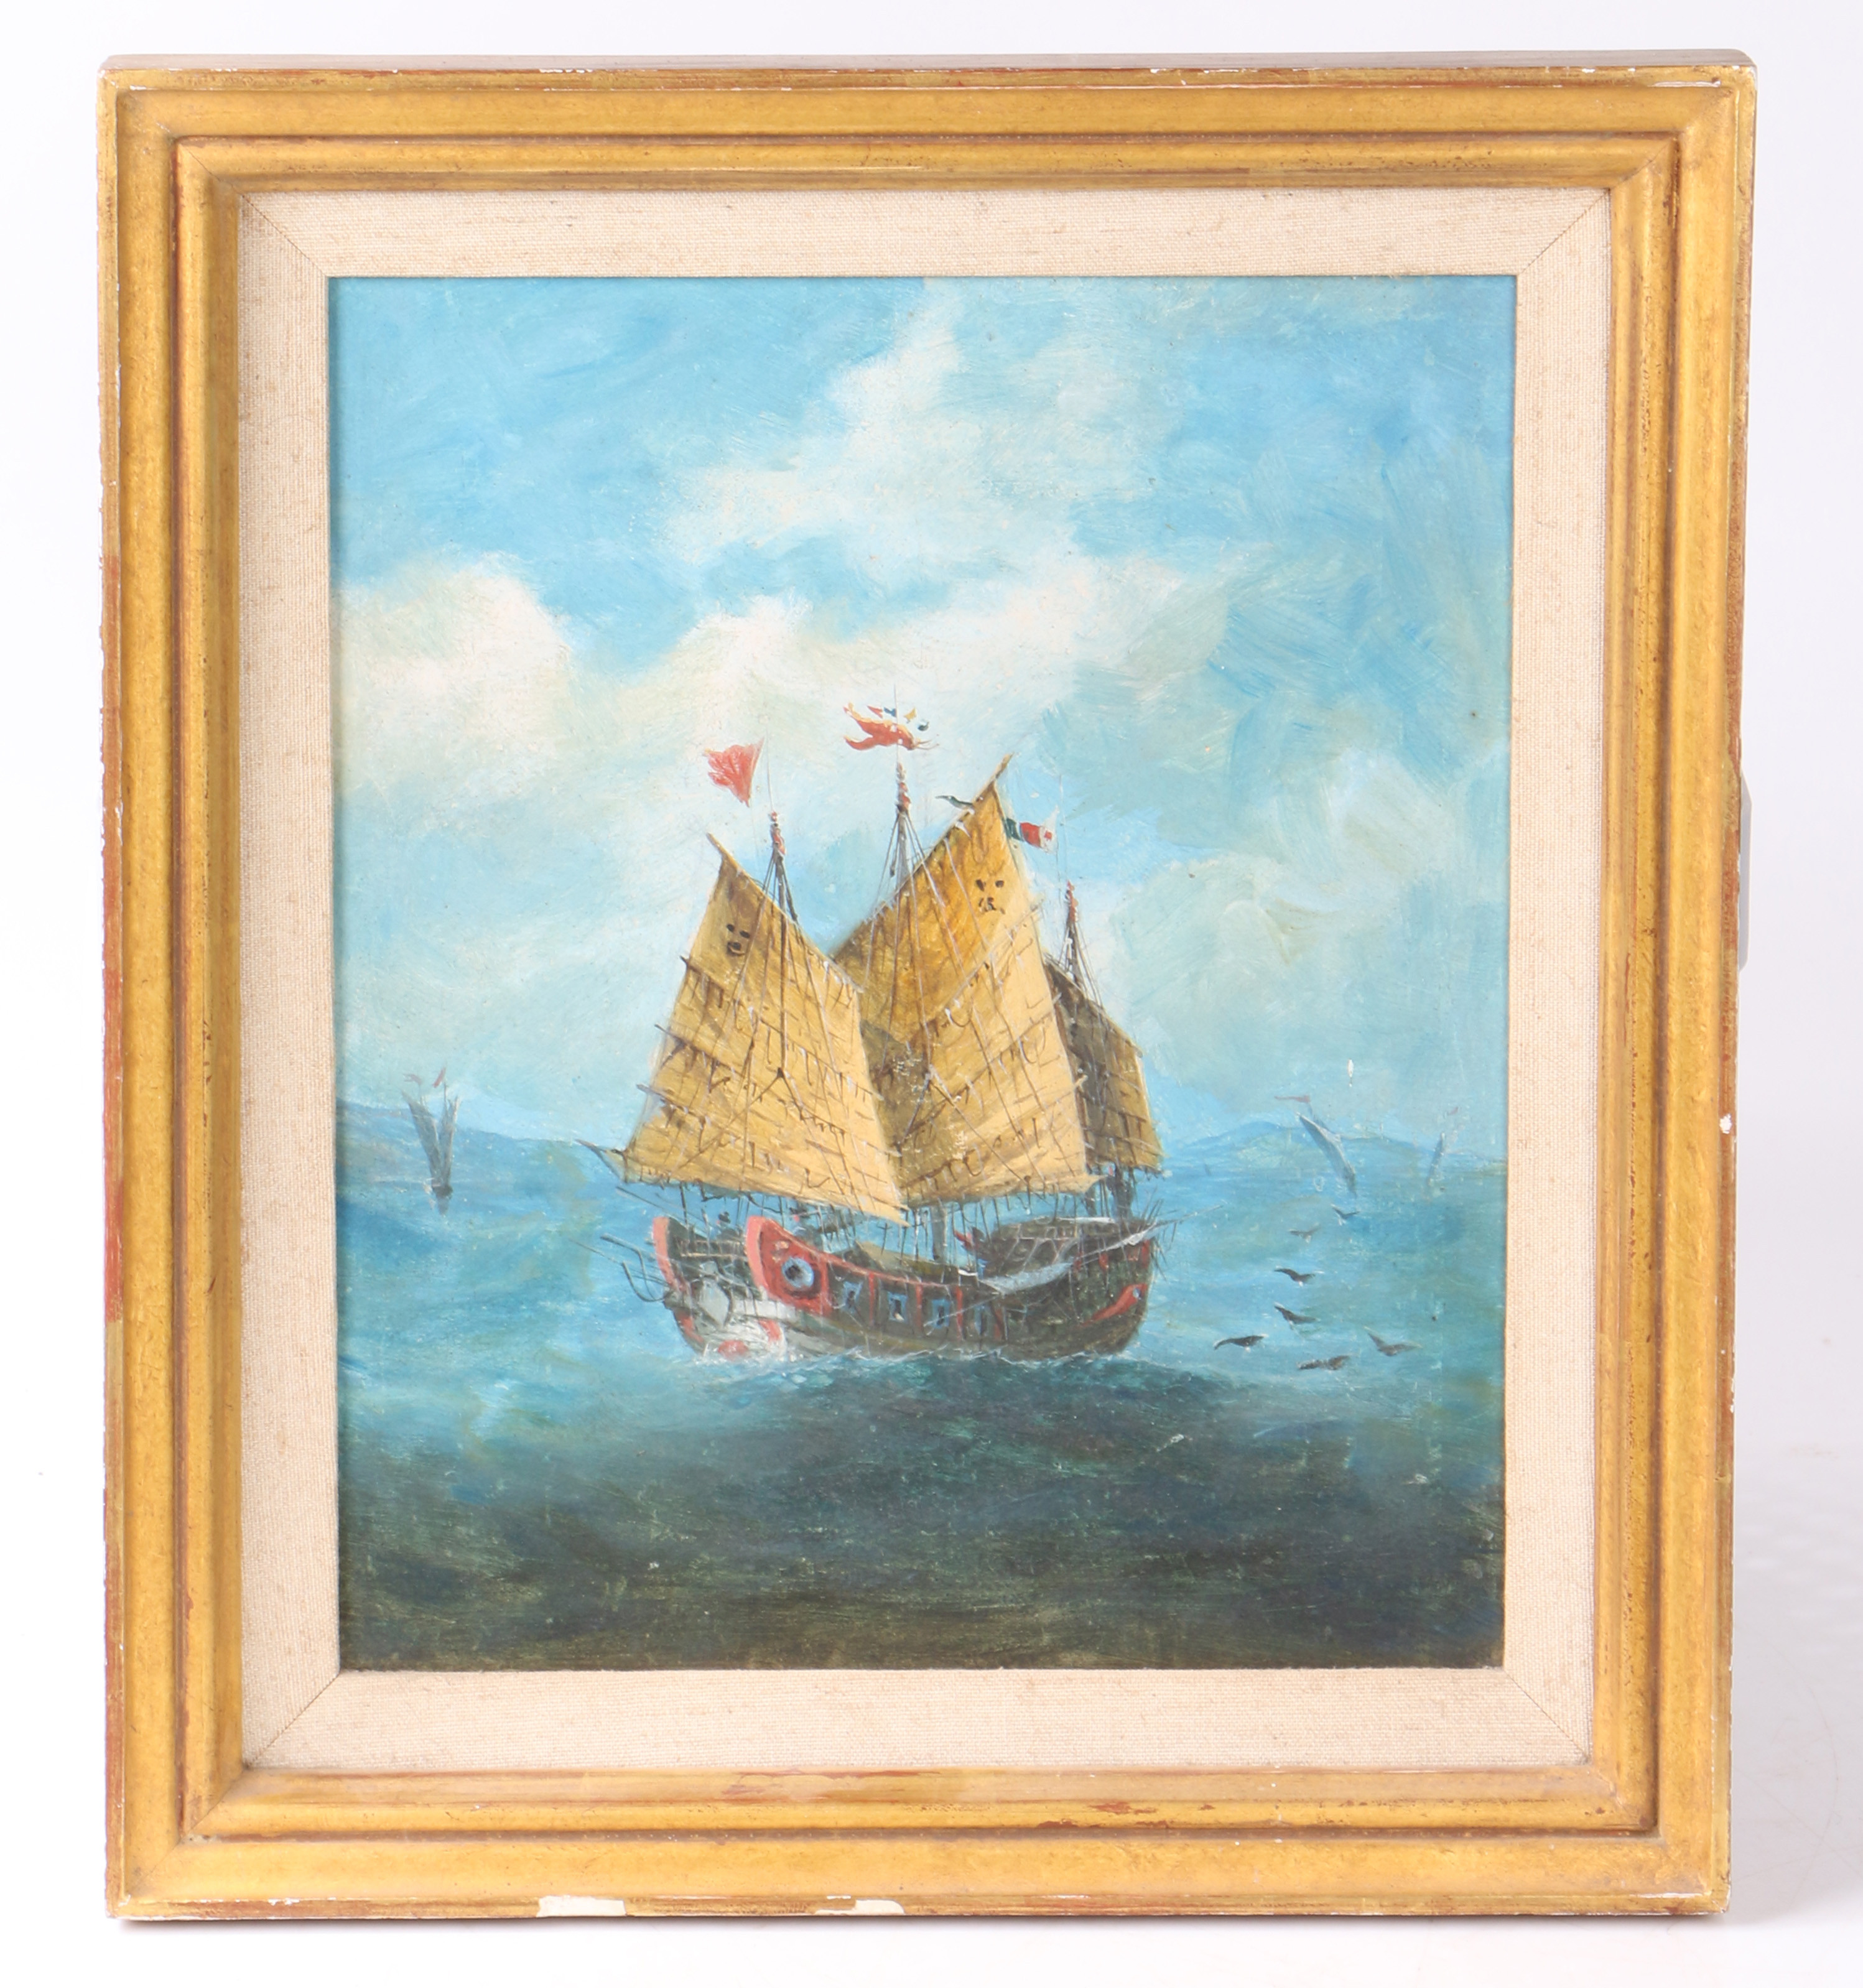 CHINESE SCHOOL (LATE 19TH/20TH CENTURY) "18TH CENTURY CHINESE THREE MASTED SHIP".